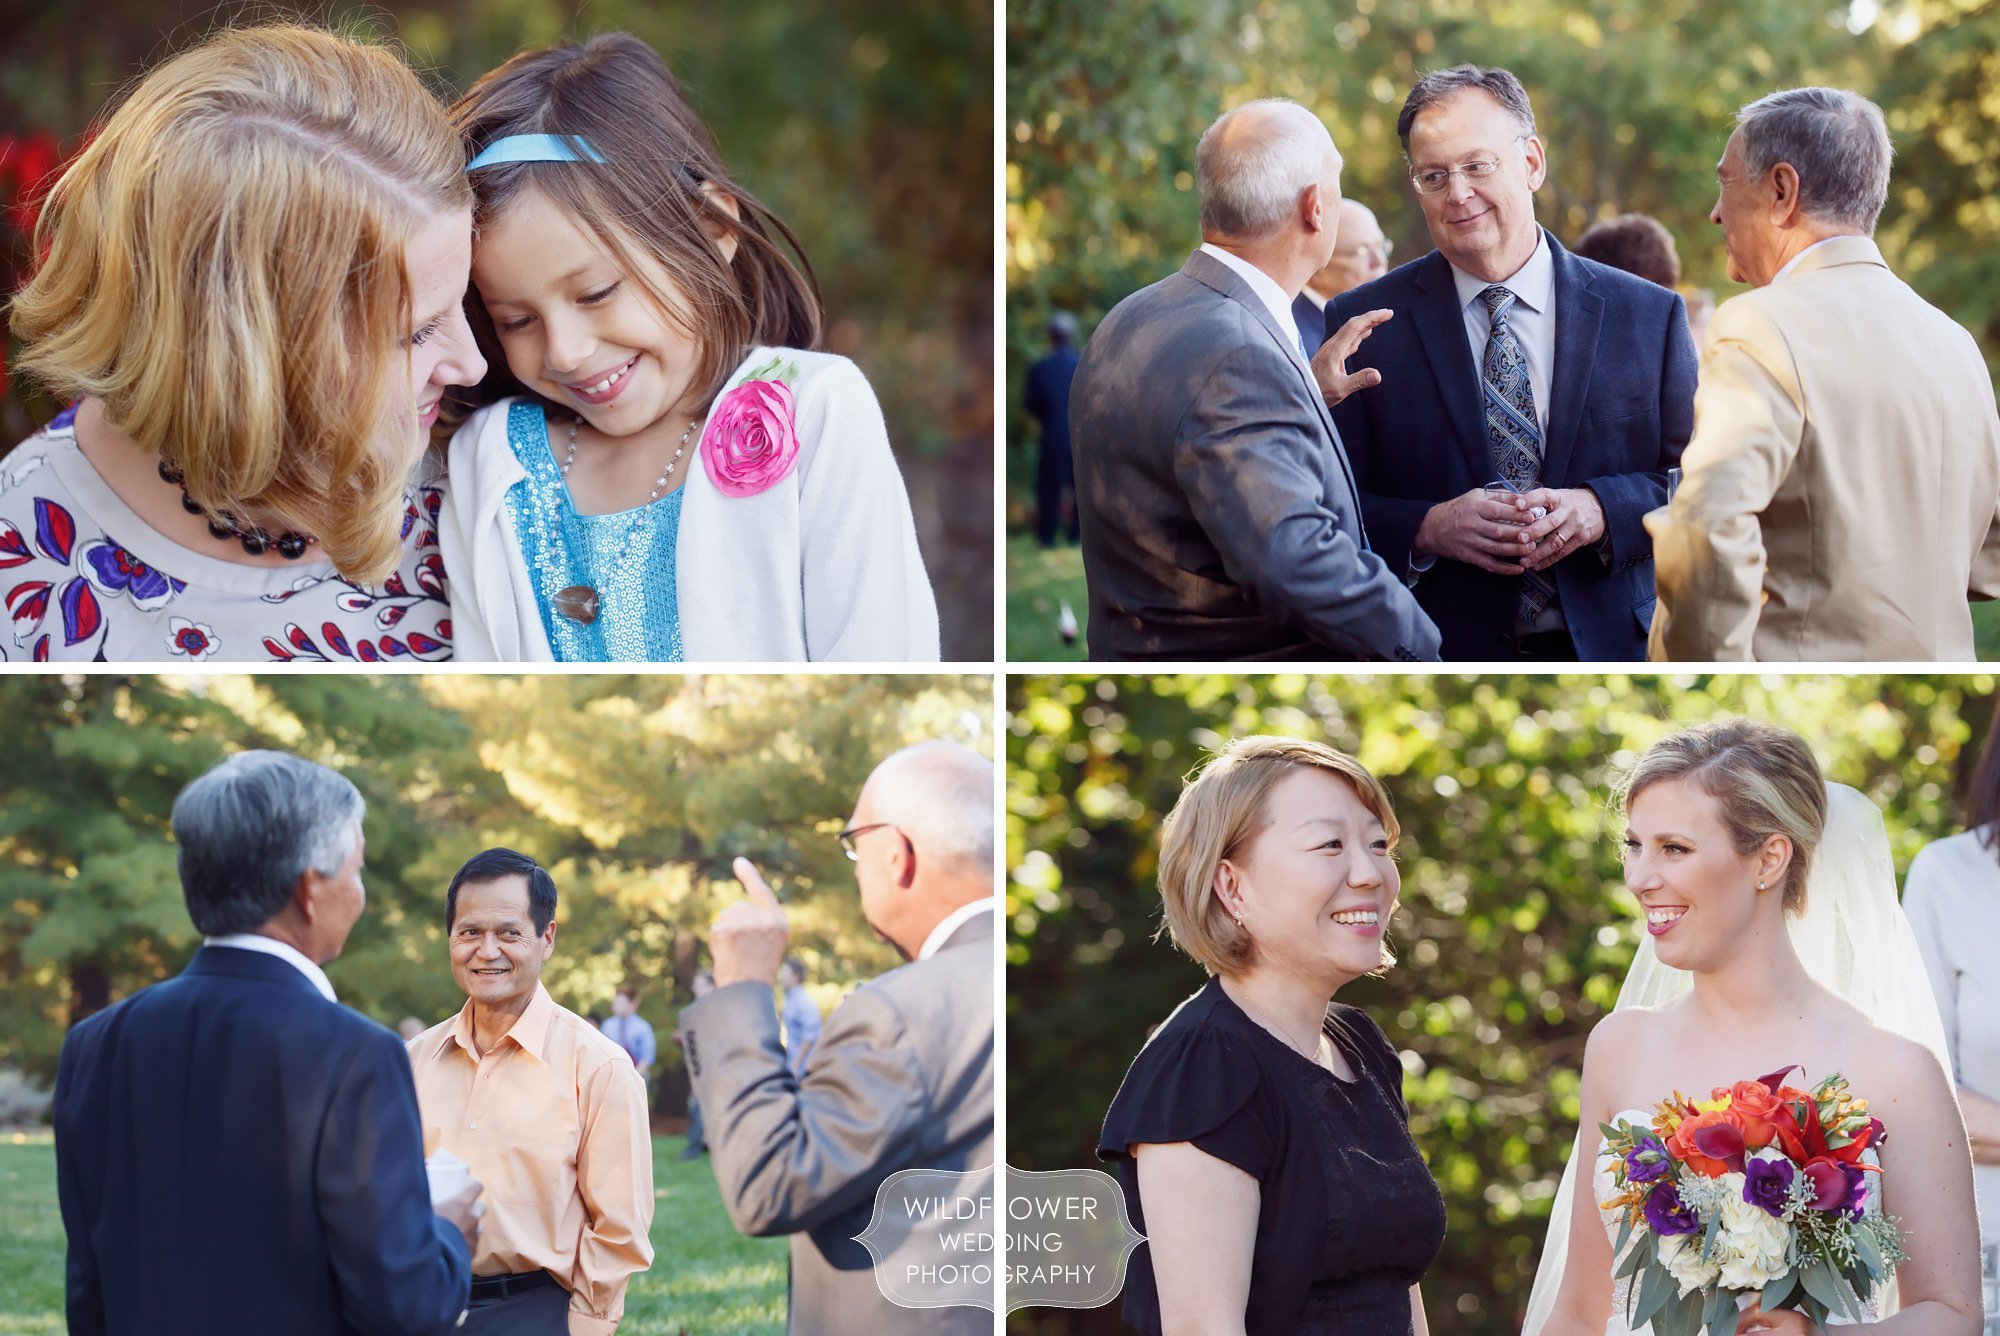 Documentary wedding pictures of guests enjoying themselves at this backyard wedding.